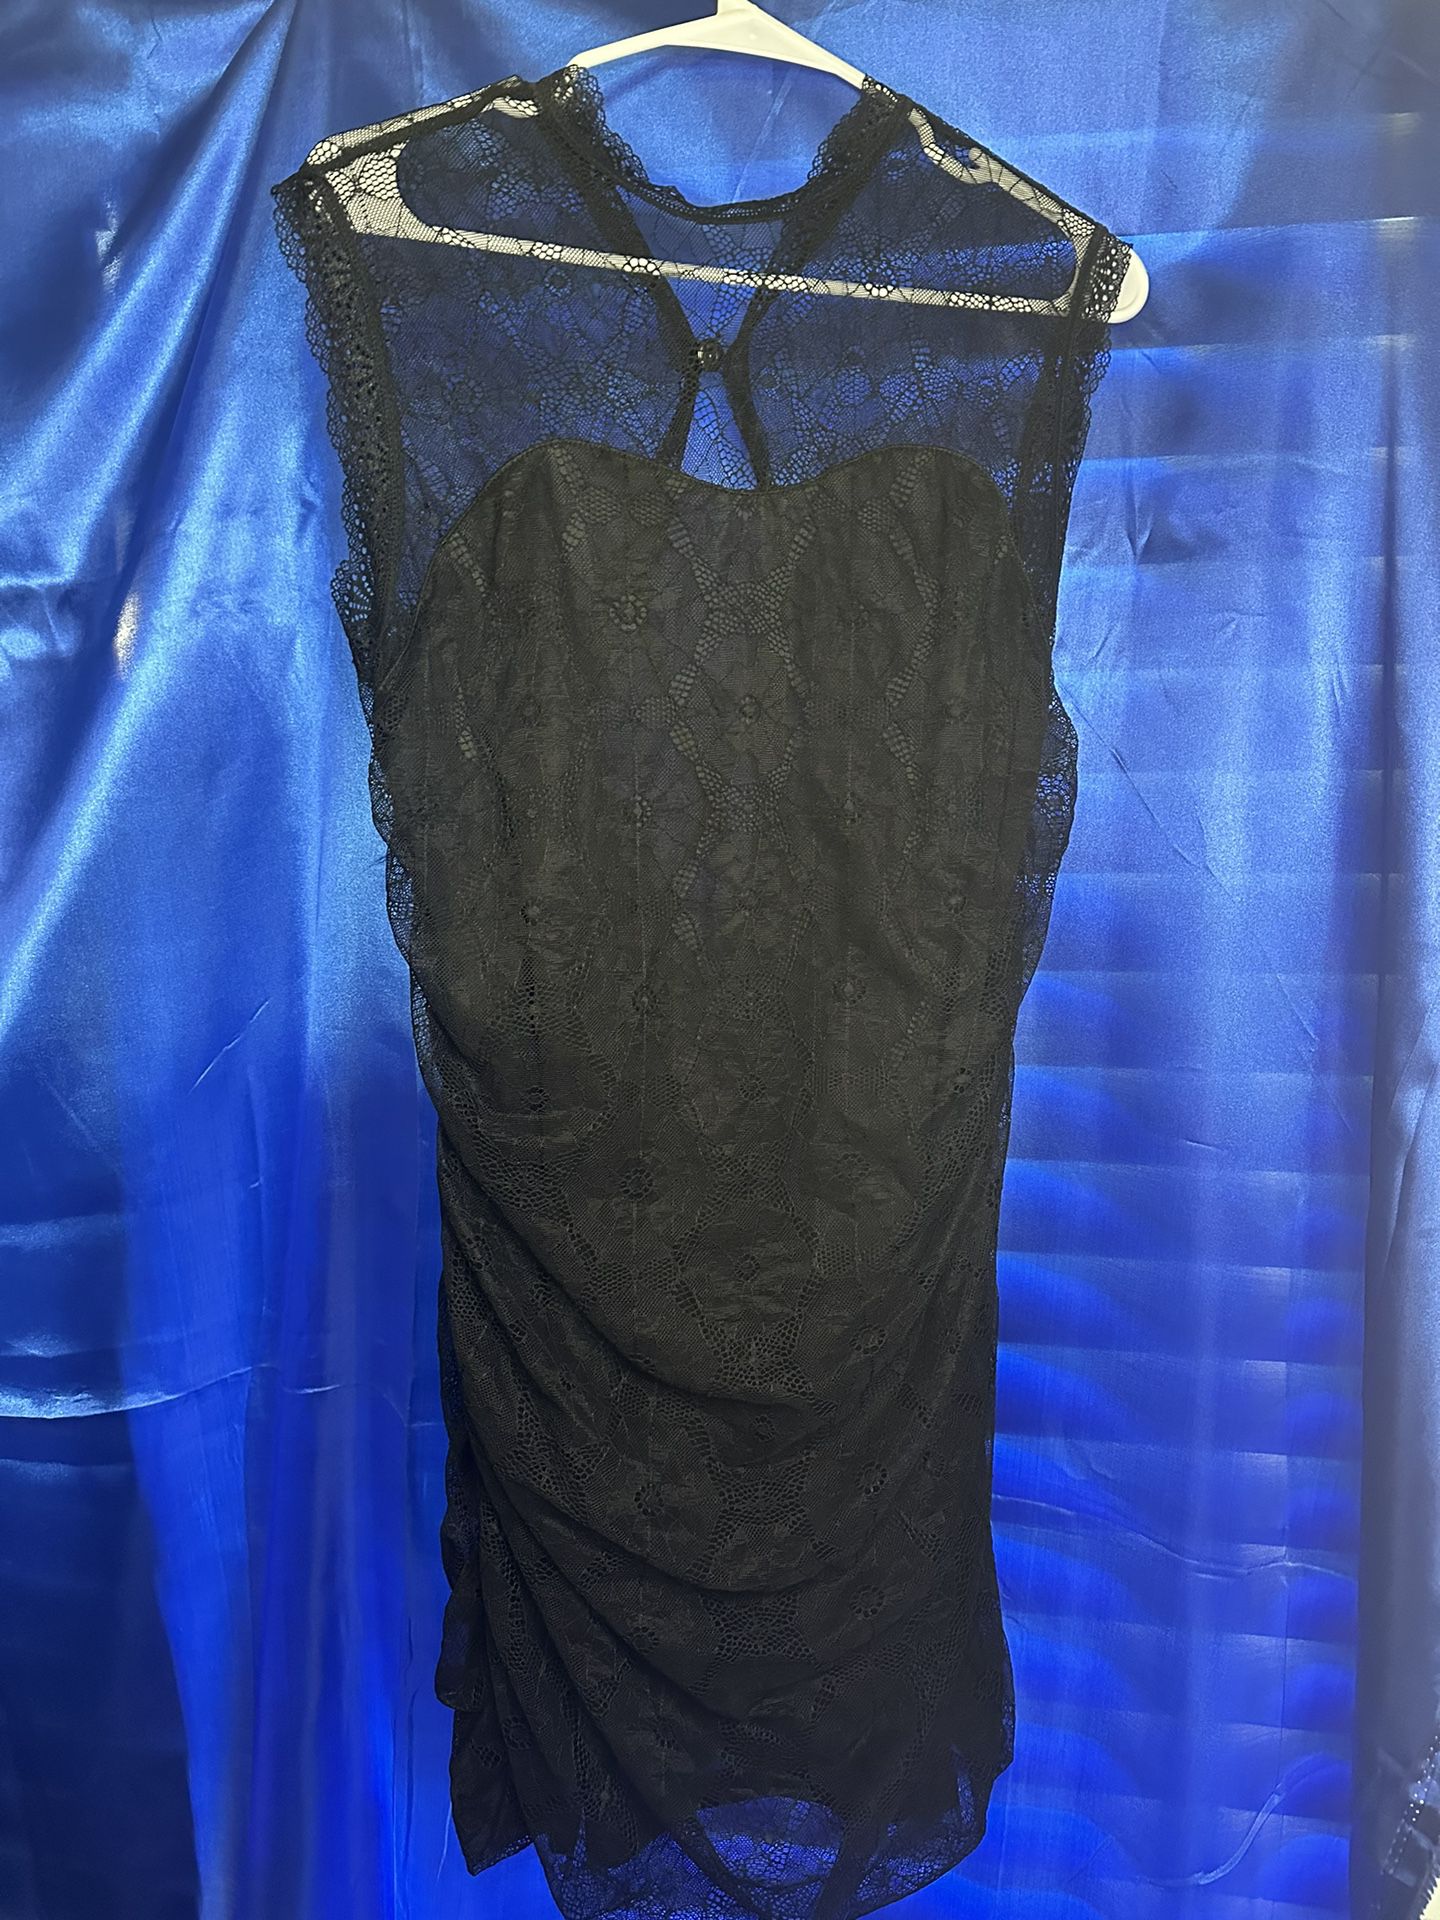 Black Dress XL Fits More Like A Large Length Mid Thigh